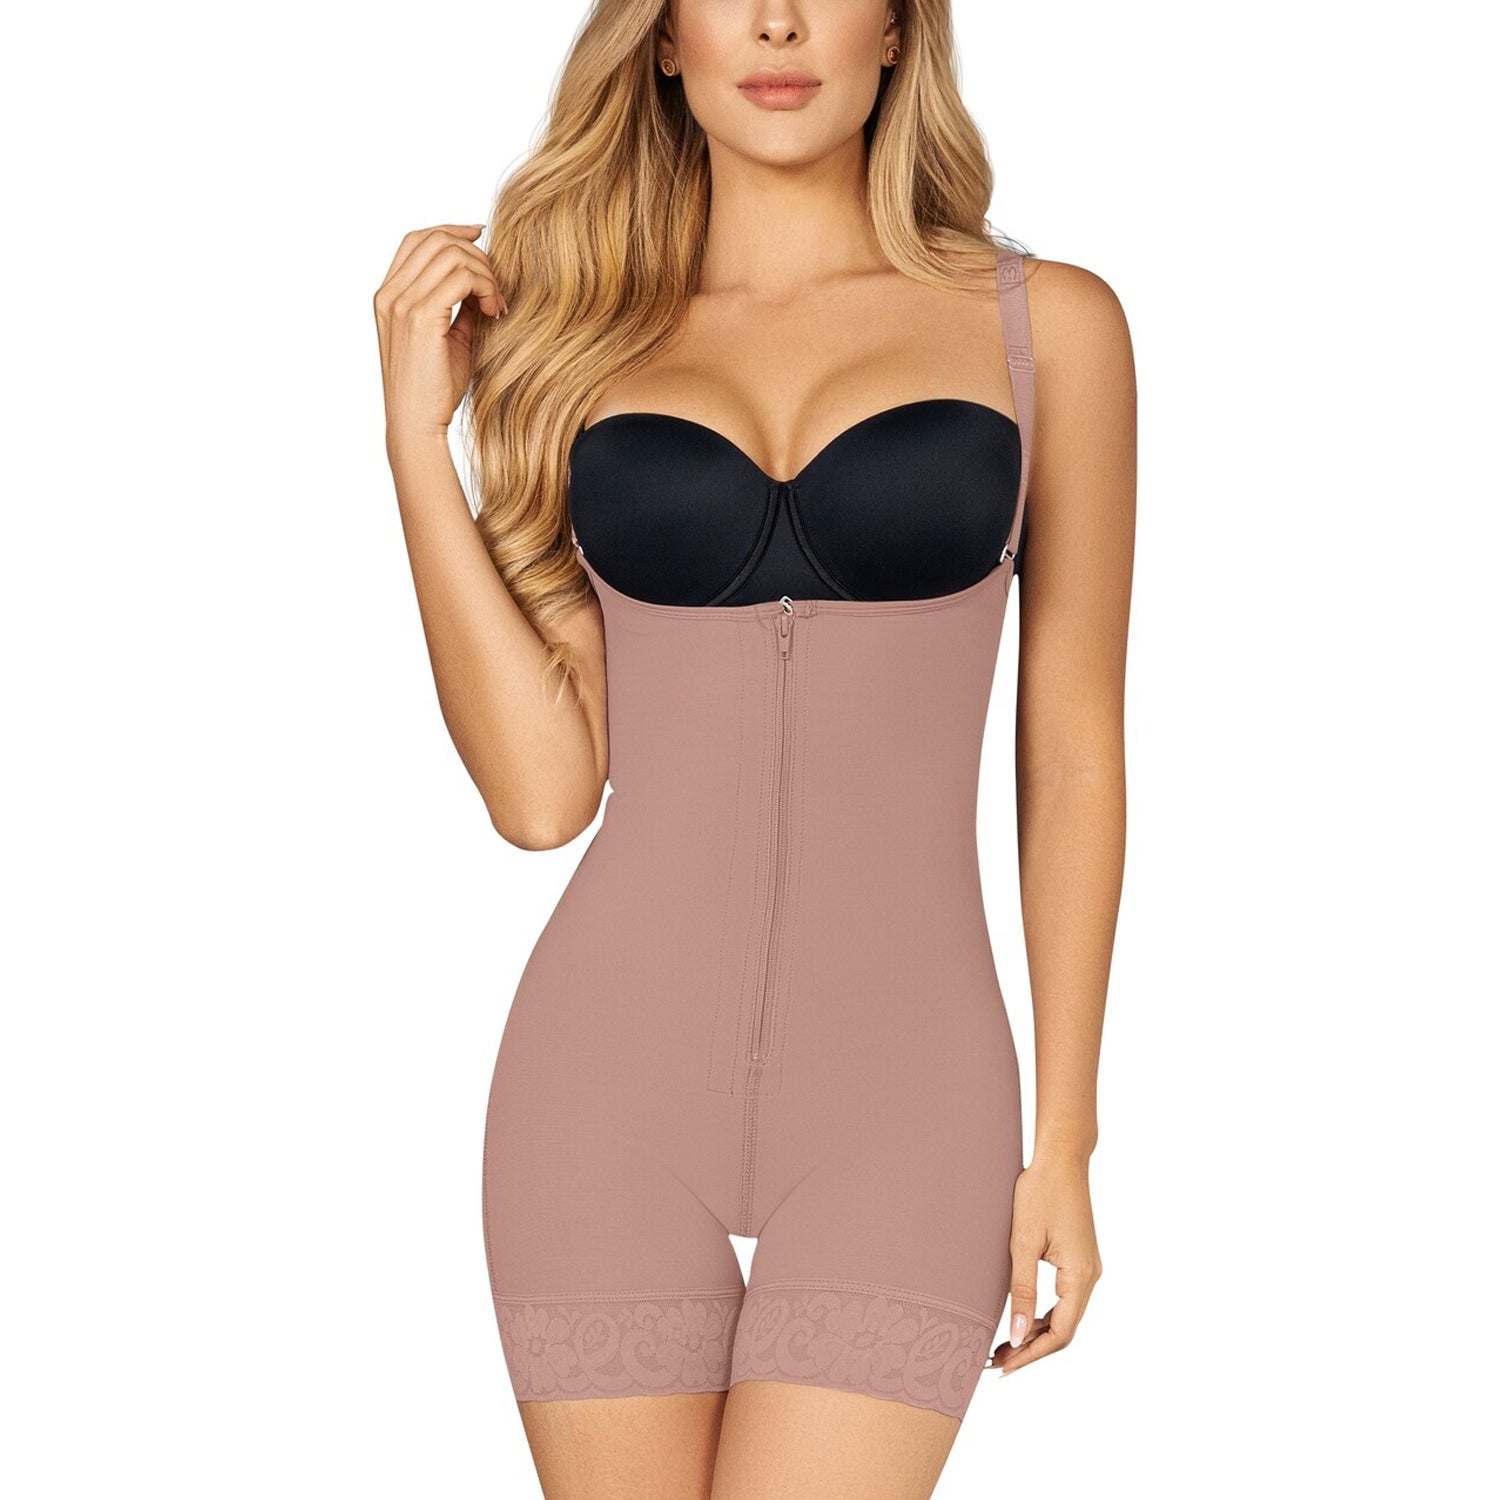 All-in-One Body Shaper: Ultimate Comfort and Design for the Modern Woma 